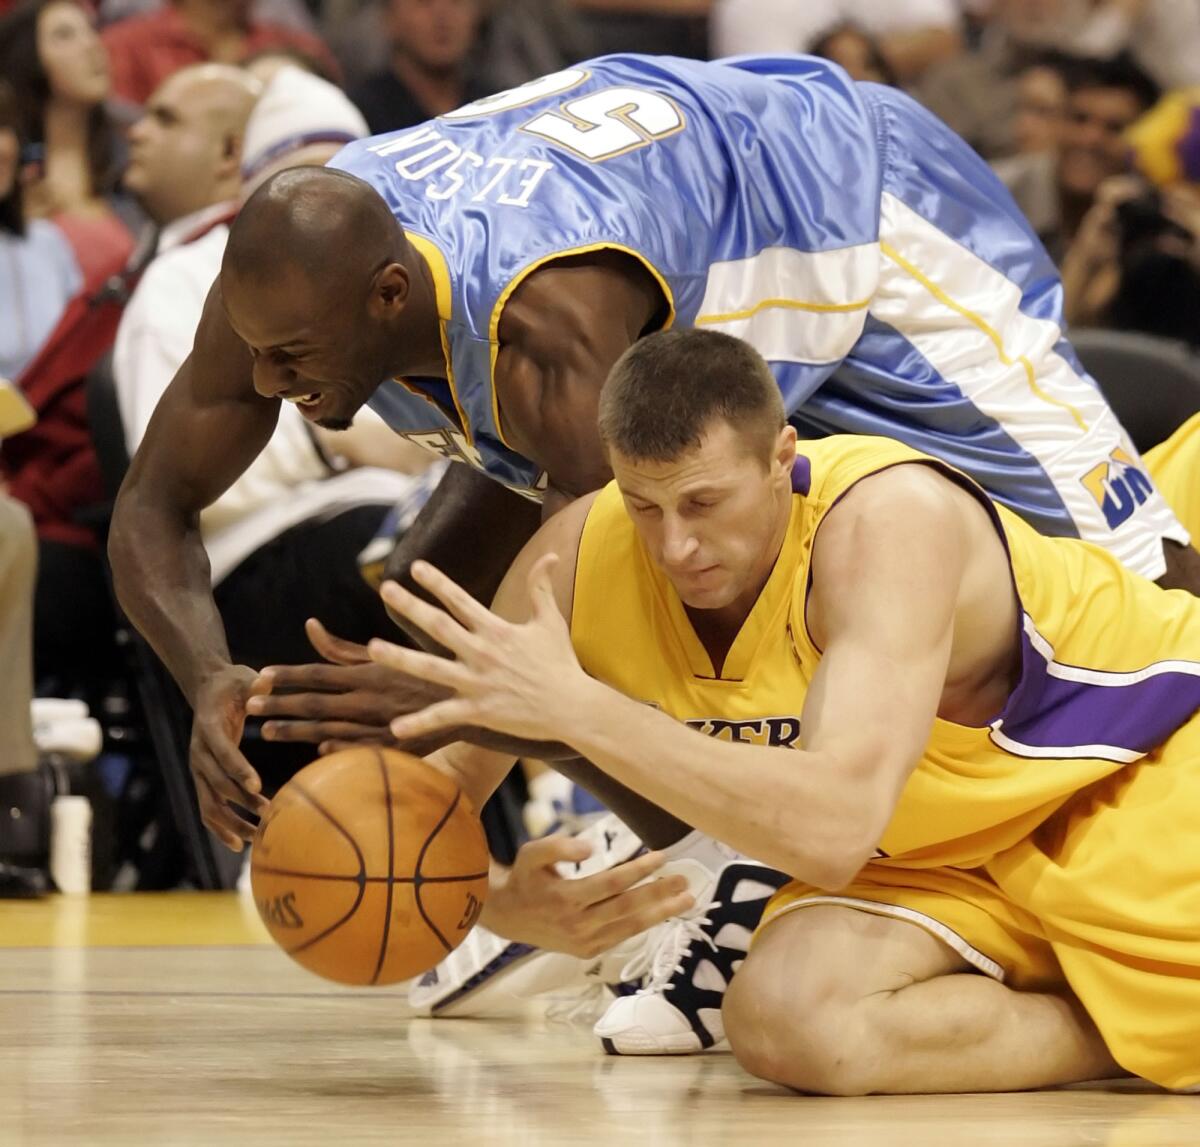 Slava Medvedenko tries to grab the basketball for the Lakers.